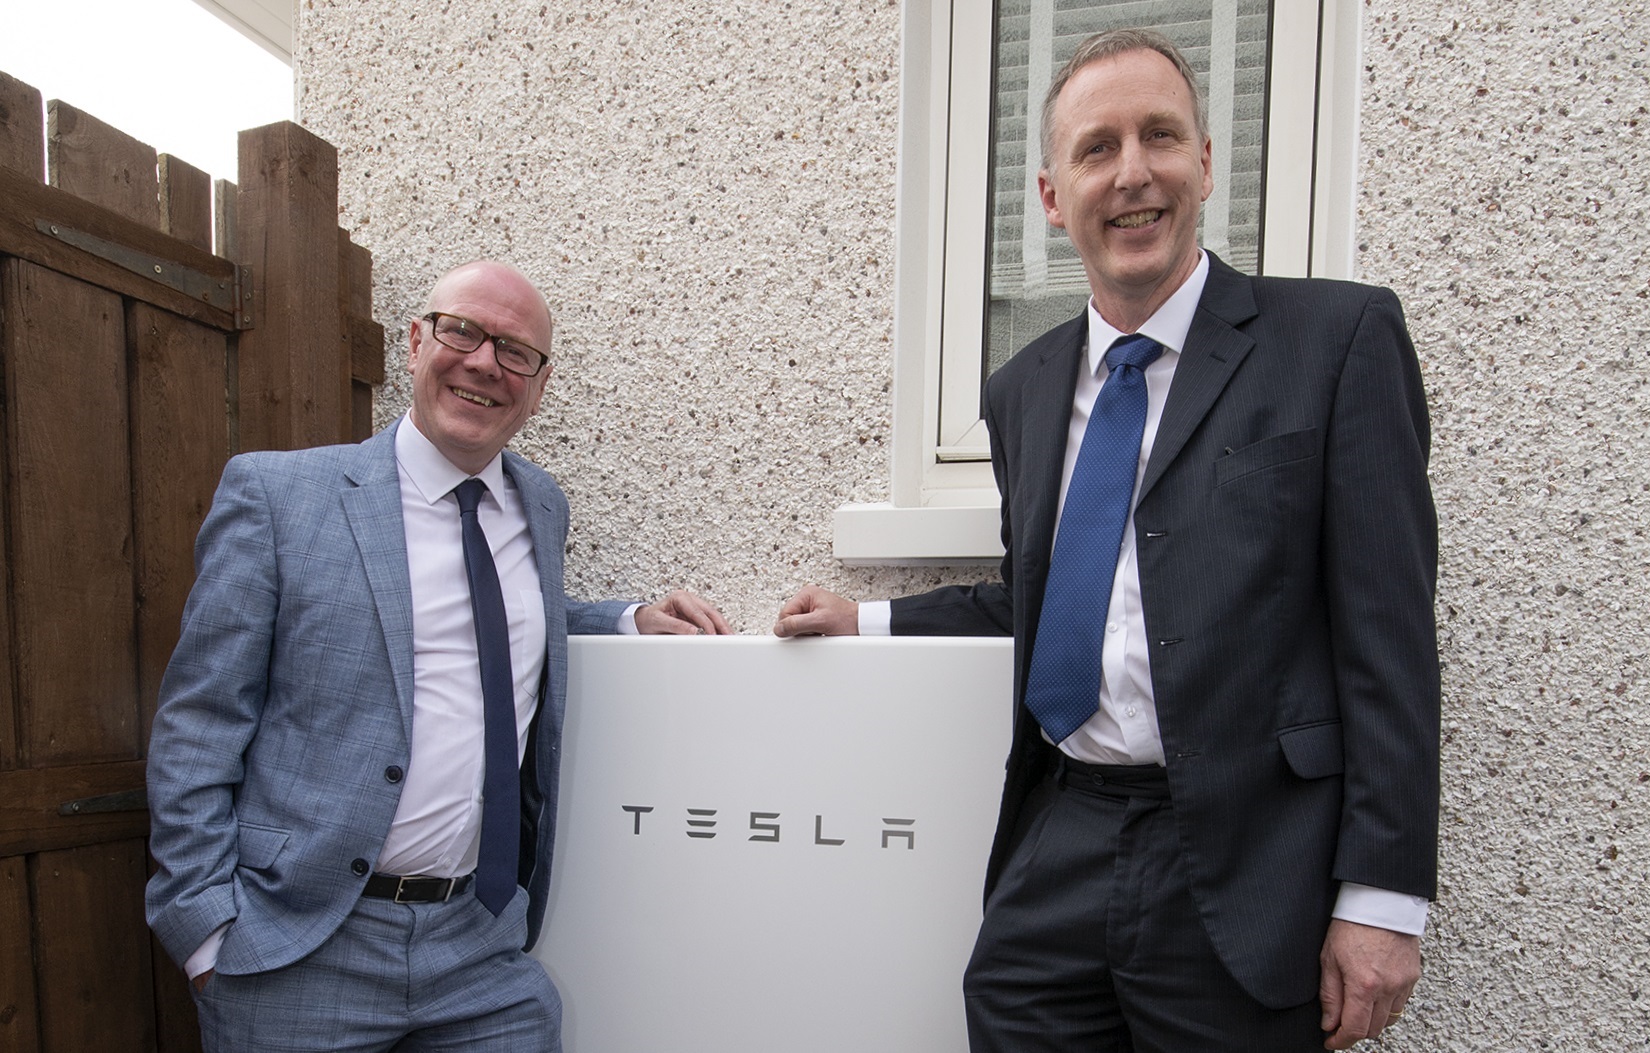 Grampian Housing Association homes fitted with Tesla batteries to help reduce electricity bills